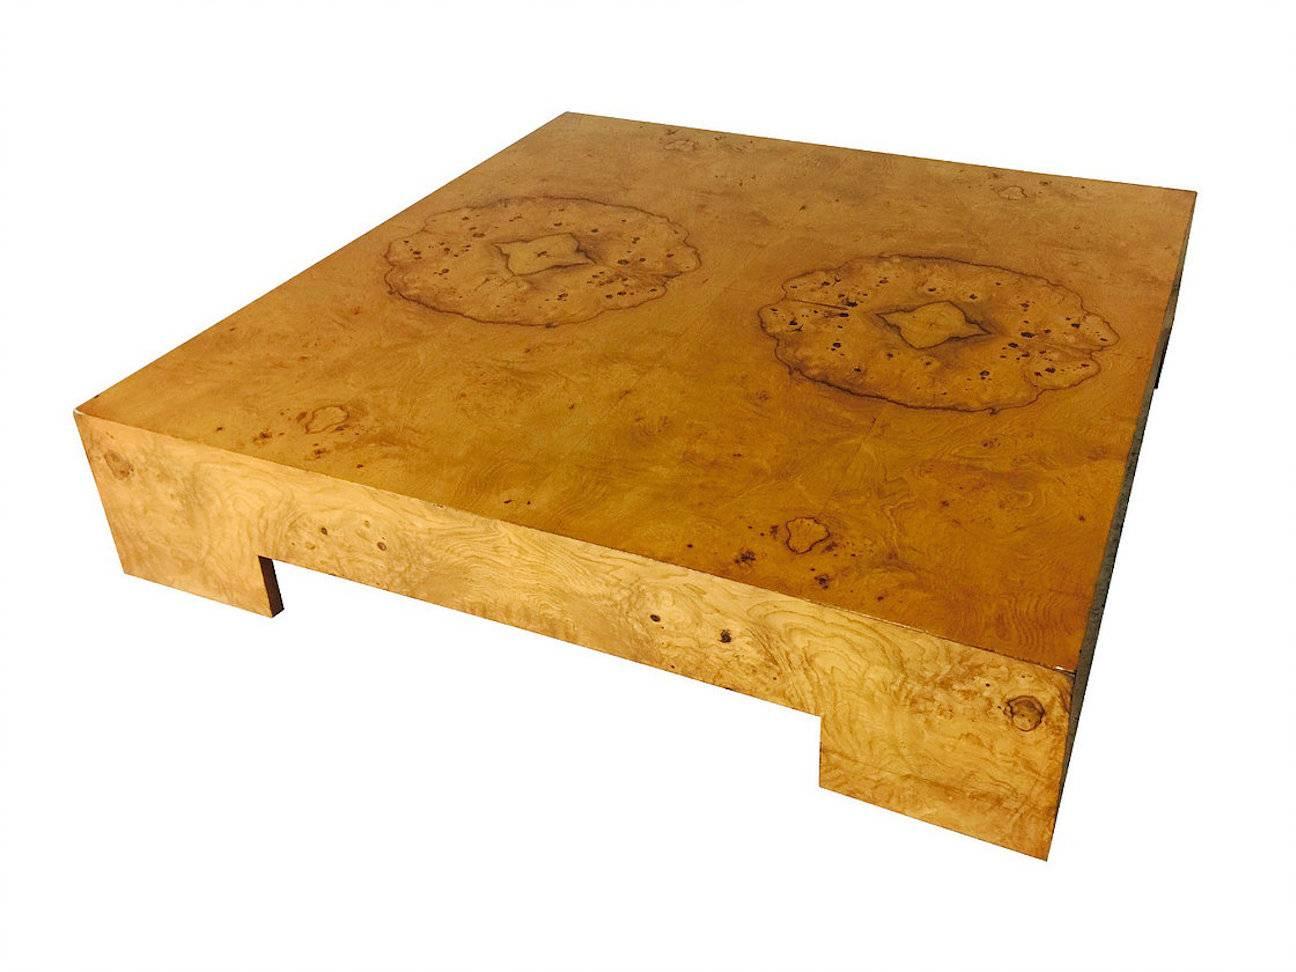 Burl wood parson style coffee table by Milo Baughman. Refinishing is recommended, circa 1970s

Dimensions: 48" W x 48" D x 10" T.